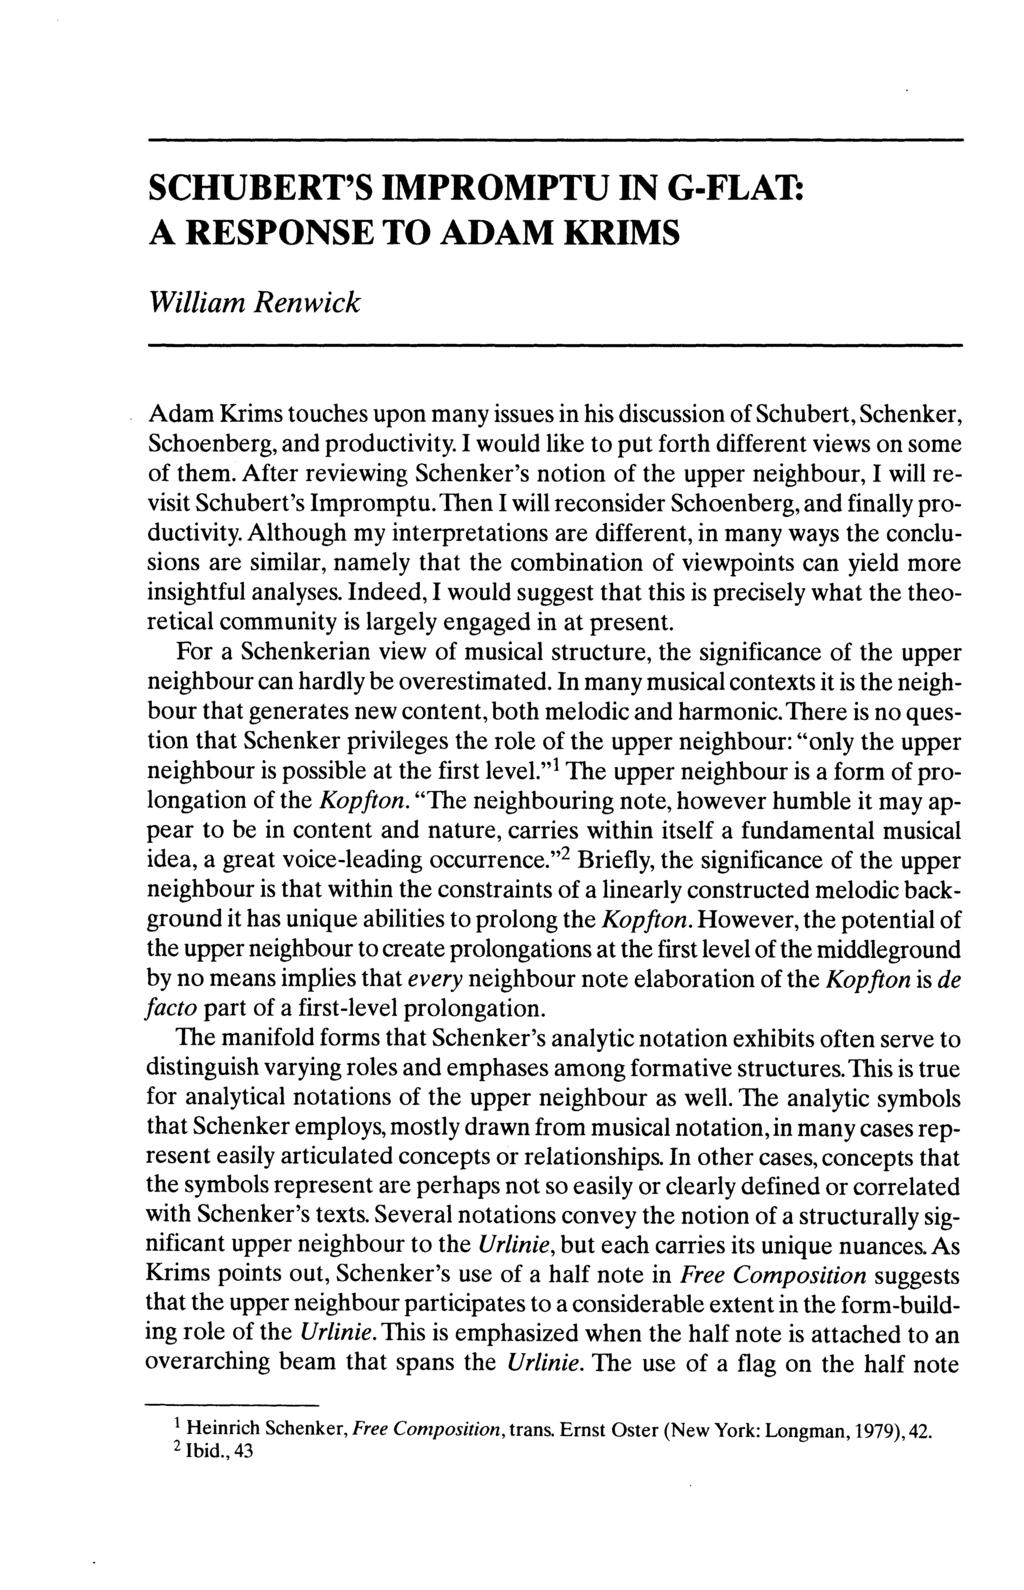 SCHUBERT'S IMPROMPTU IN G-FLAI: A RESPONSE TO ADAM KRIMS William Renwick Adam Krims touches upon many issues in his discussion of Schubert, Schenker, Schoenberg, and productivity.